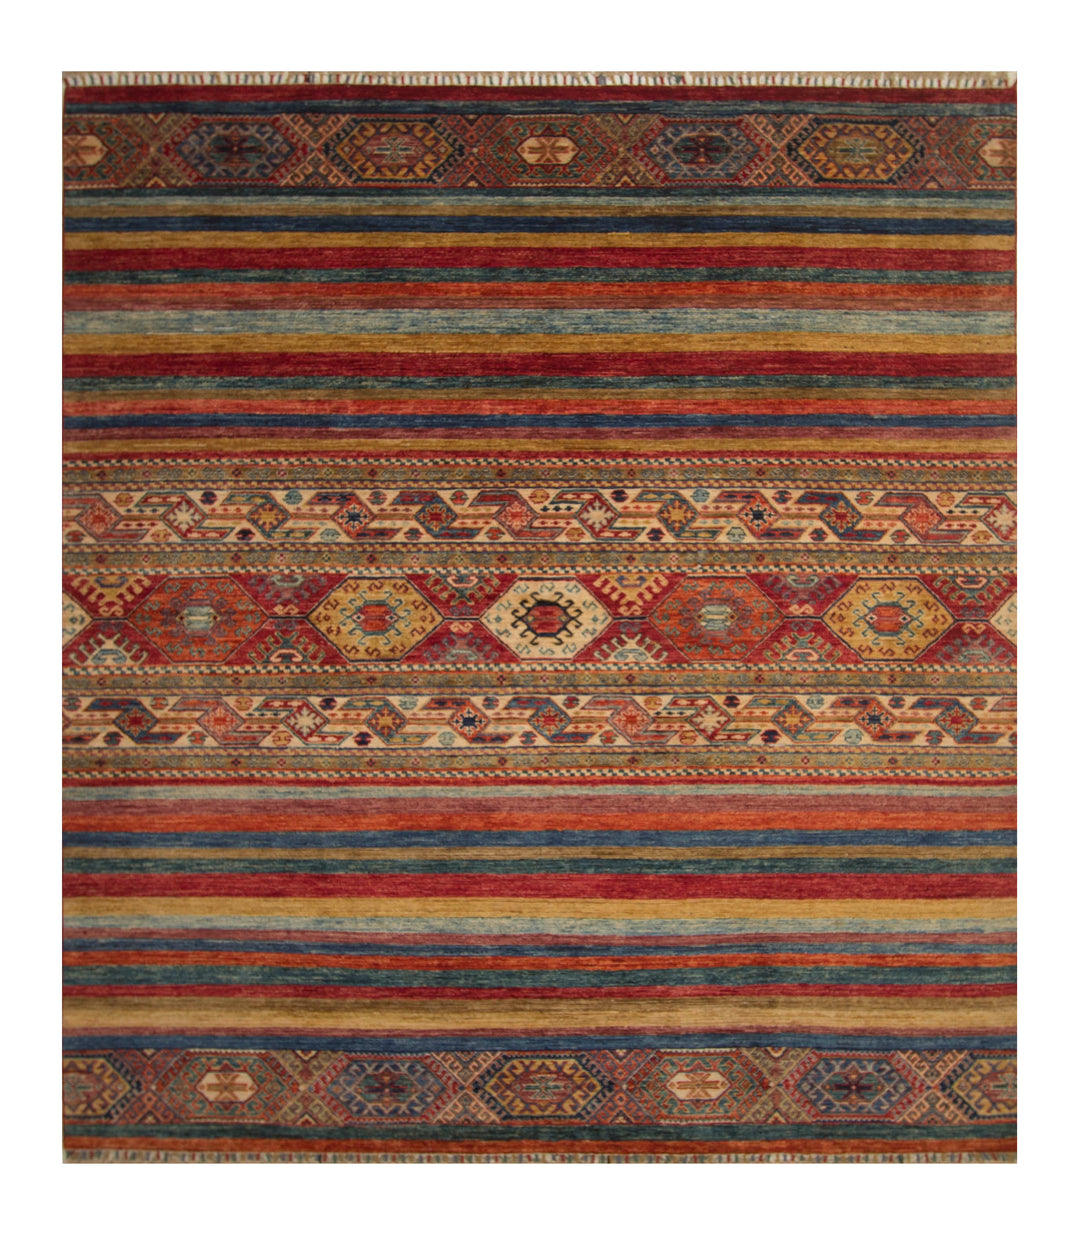 SOLD 7x7 Red Muticolor Square Tribal Afghan Hand knotted Striped Rug - Yildiz Rugs